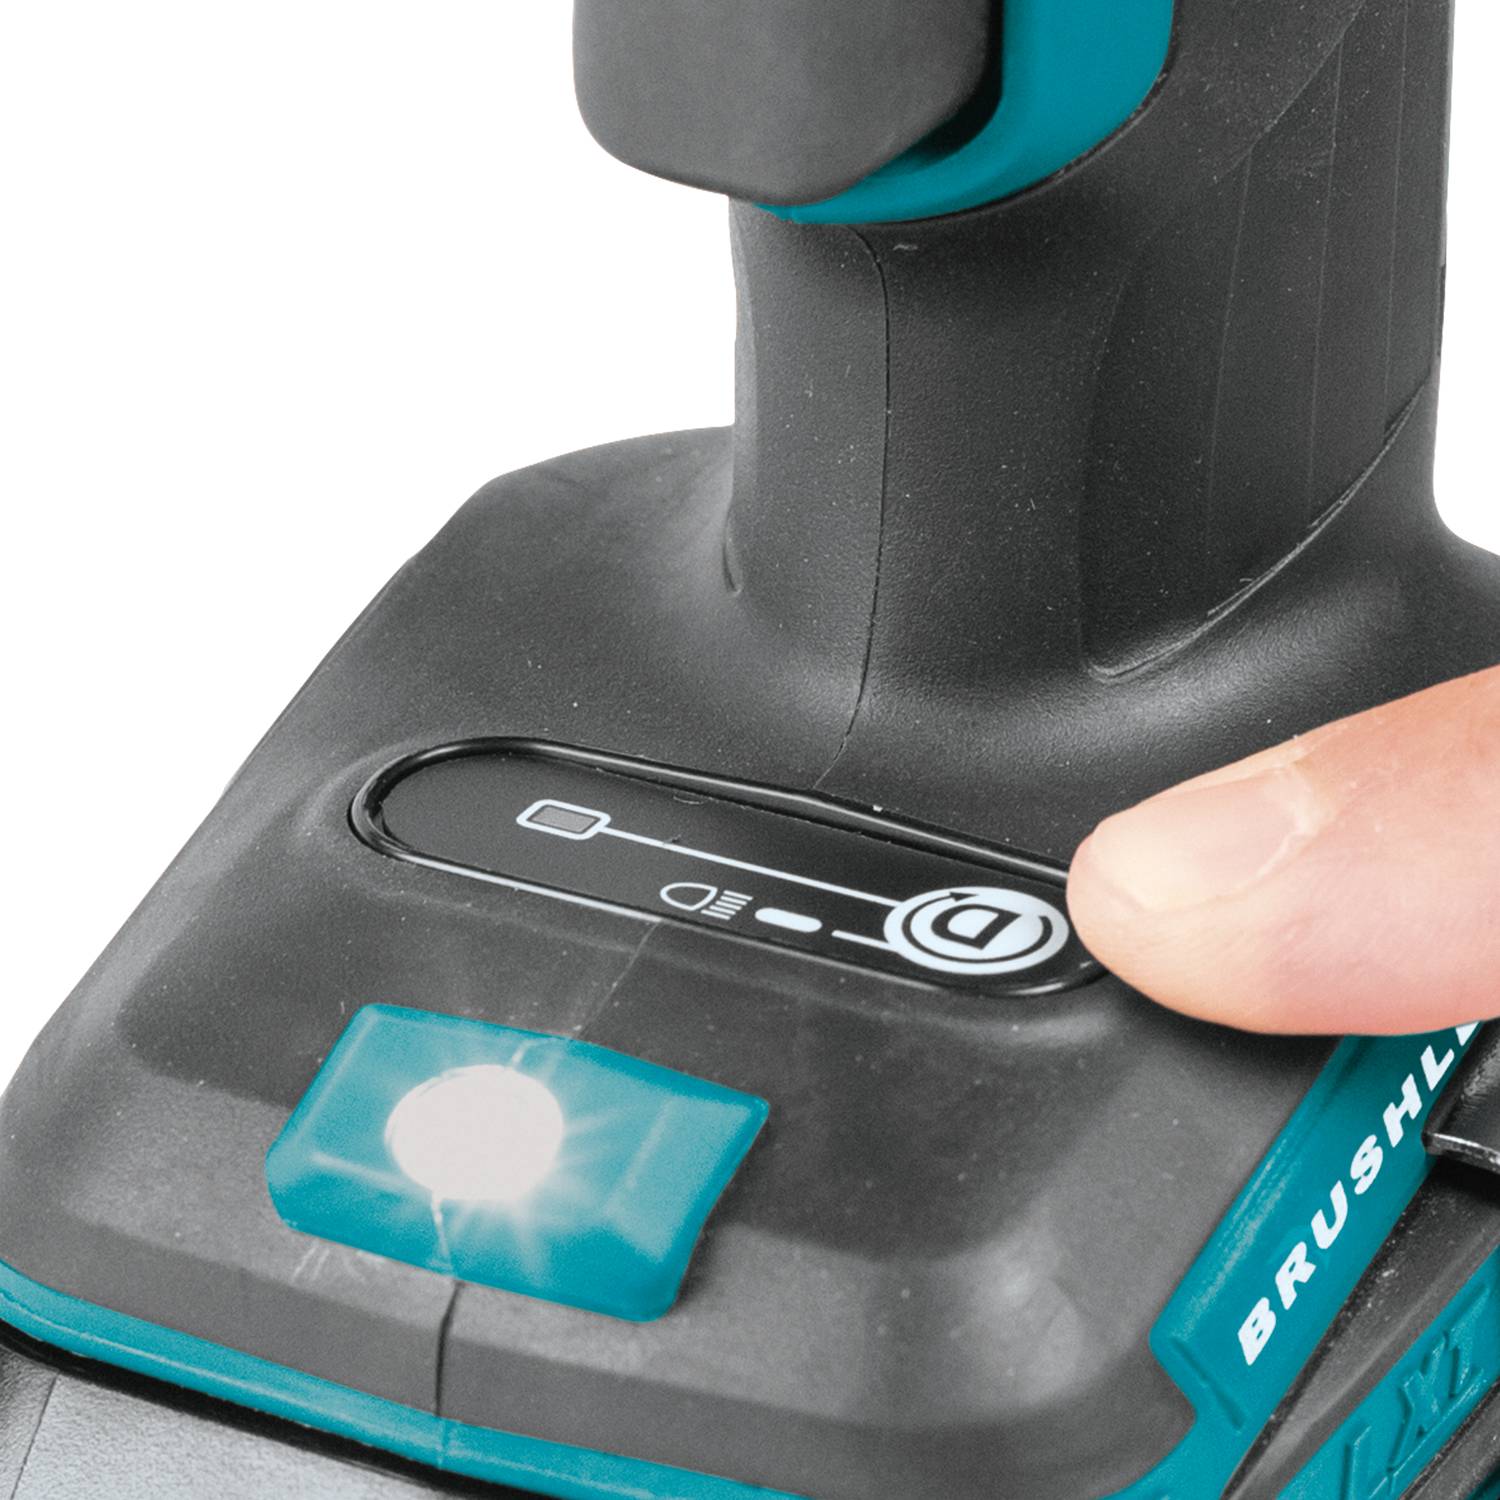 Makita 18V LXT Lithium-Ion Brushless 2500 RPM Cordless Screwdriver Kit from GME Supply